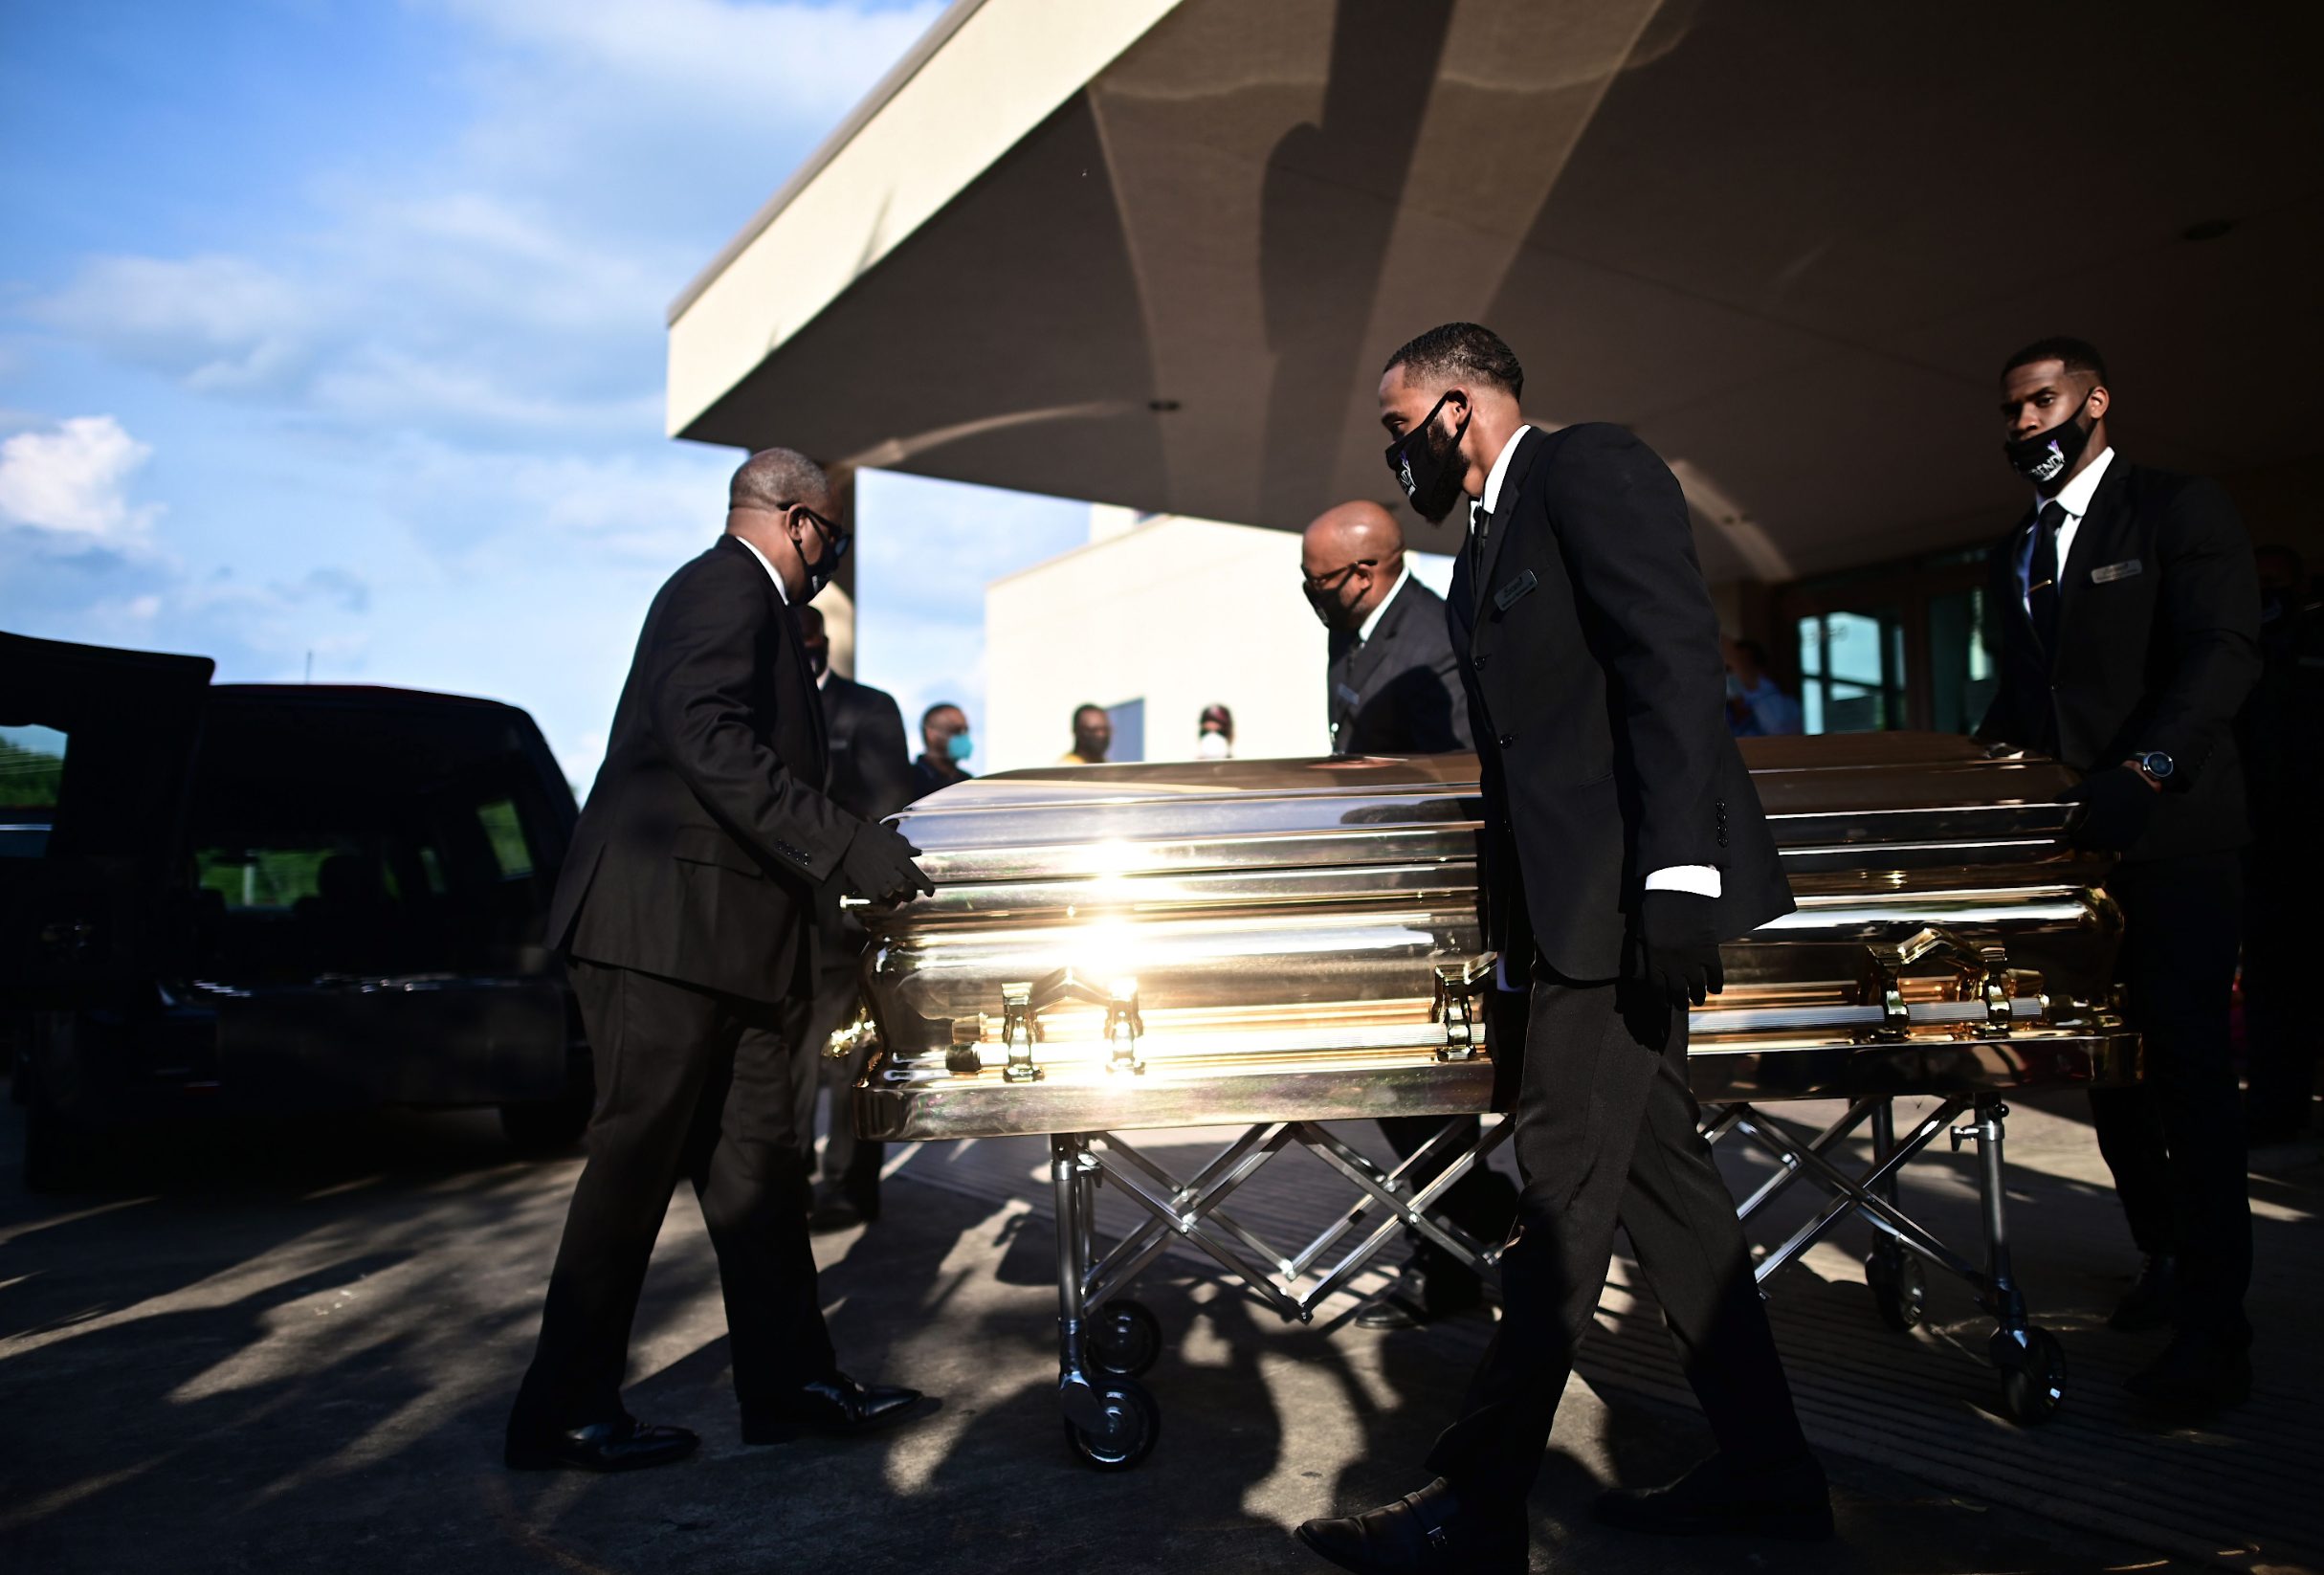 TOPSHOT - Pallbearers move the casket of George Floyd after a public viewing at the Fountain of Praise church in Houston, Texas on June 8, 2020. - Democrats vowed June 7, 2020 to press legislation to fight systemic racism in US law enforcement as the battle for change triggered by the police killing of George Floyd began shifting from the streets to the political sphere.Demonstrations continued across the nation Sunday -- including in Washington, New York and Winter Park, Florida -- as protesters began focusing their initial outrage over the death of the unarmed Floyd into demands for police reform and social justice. (Photo by Johannes EISELE / AFP)